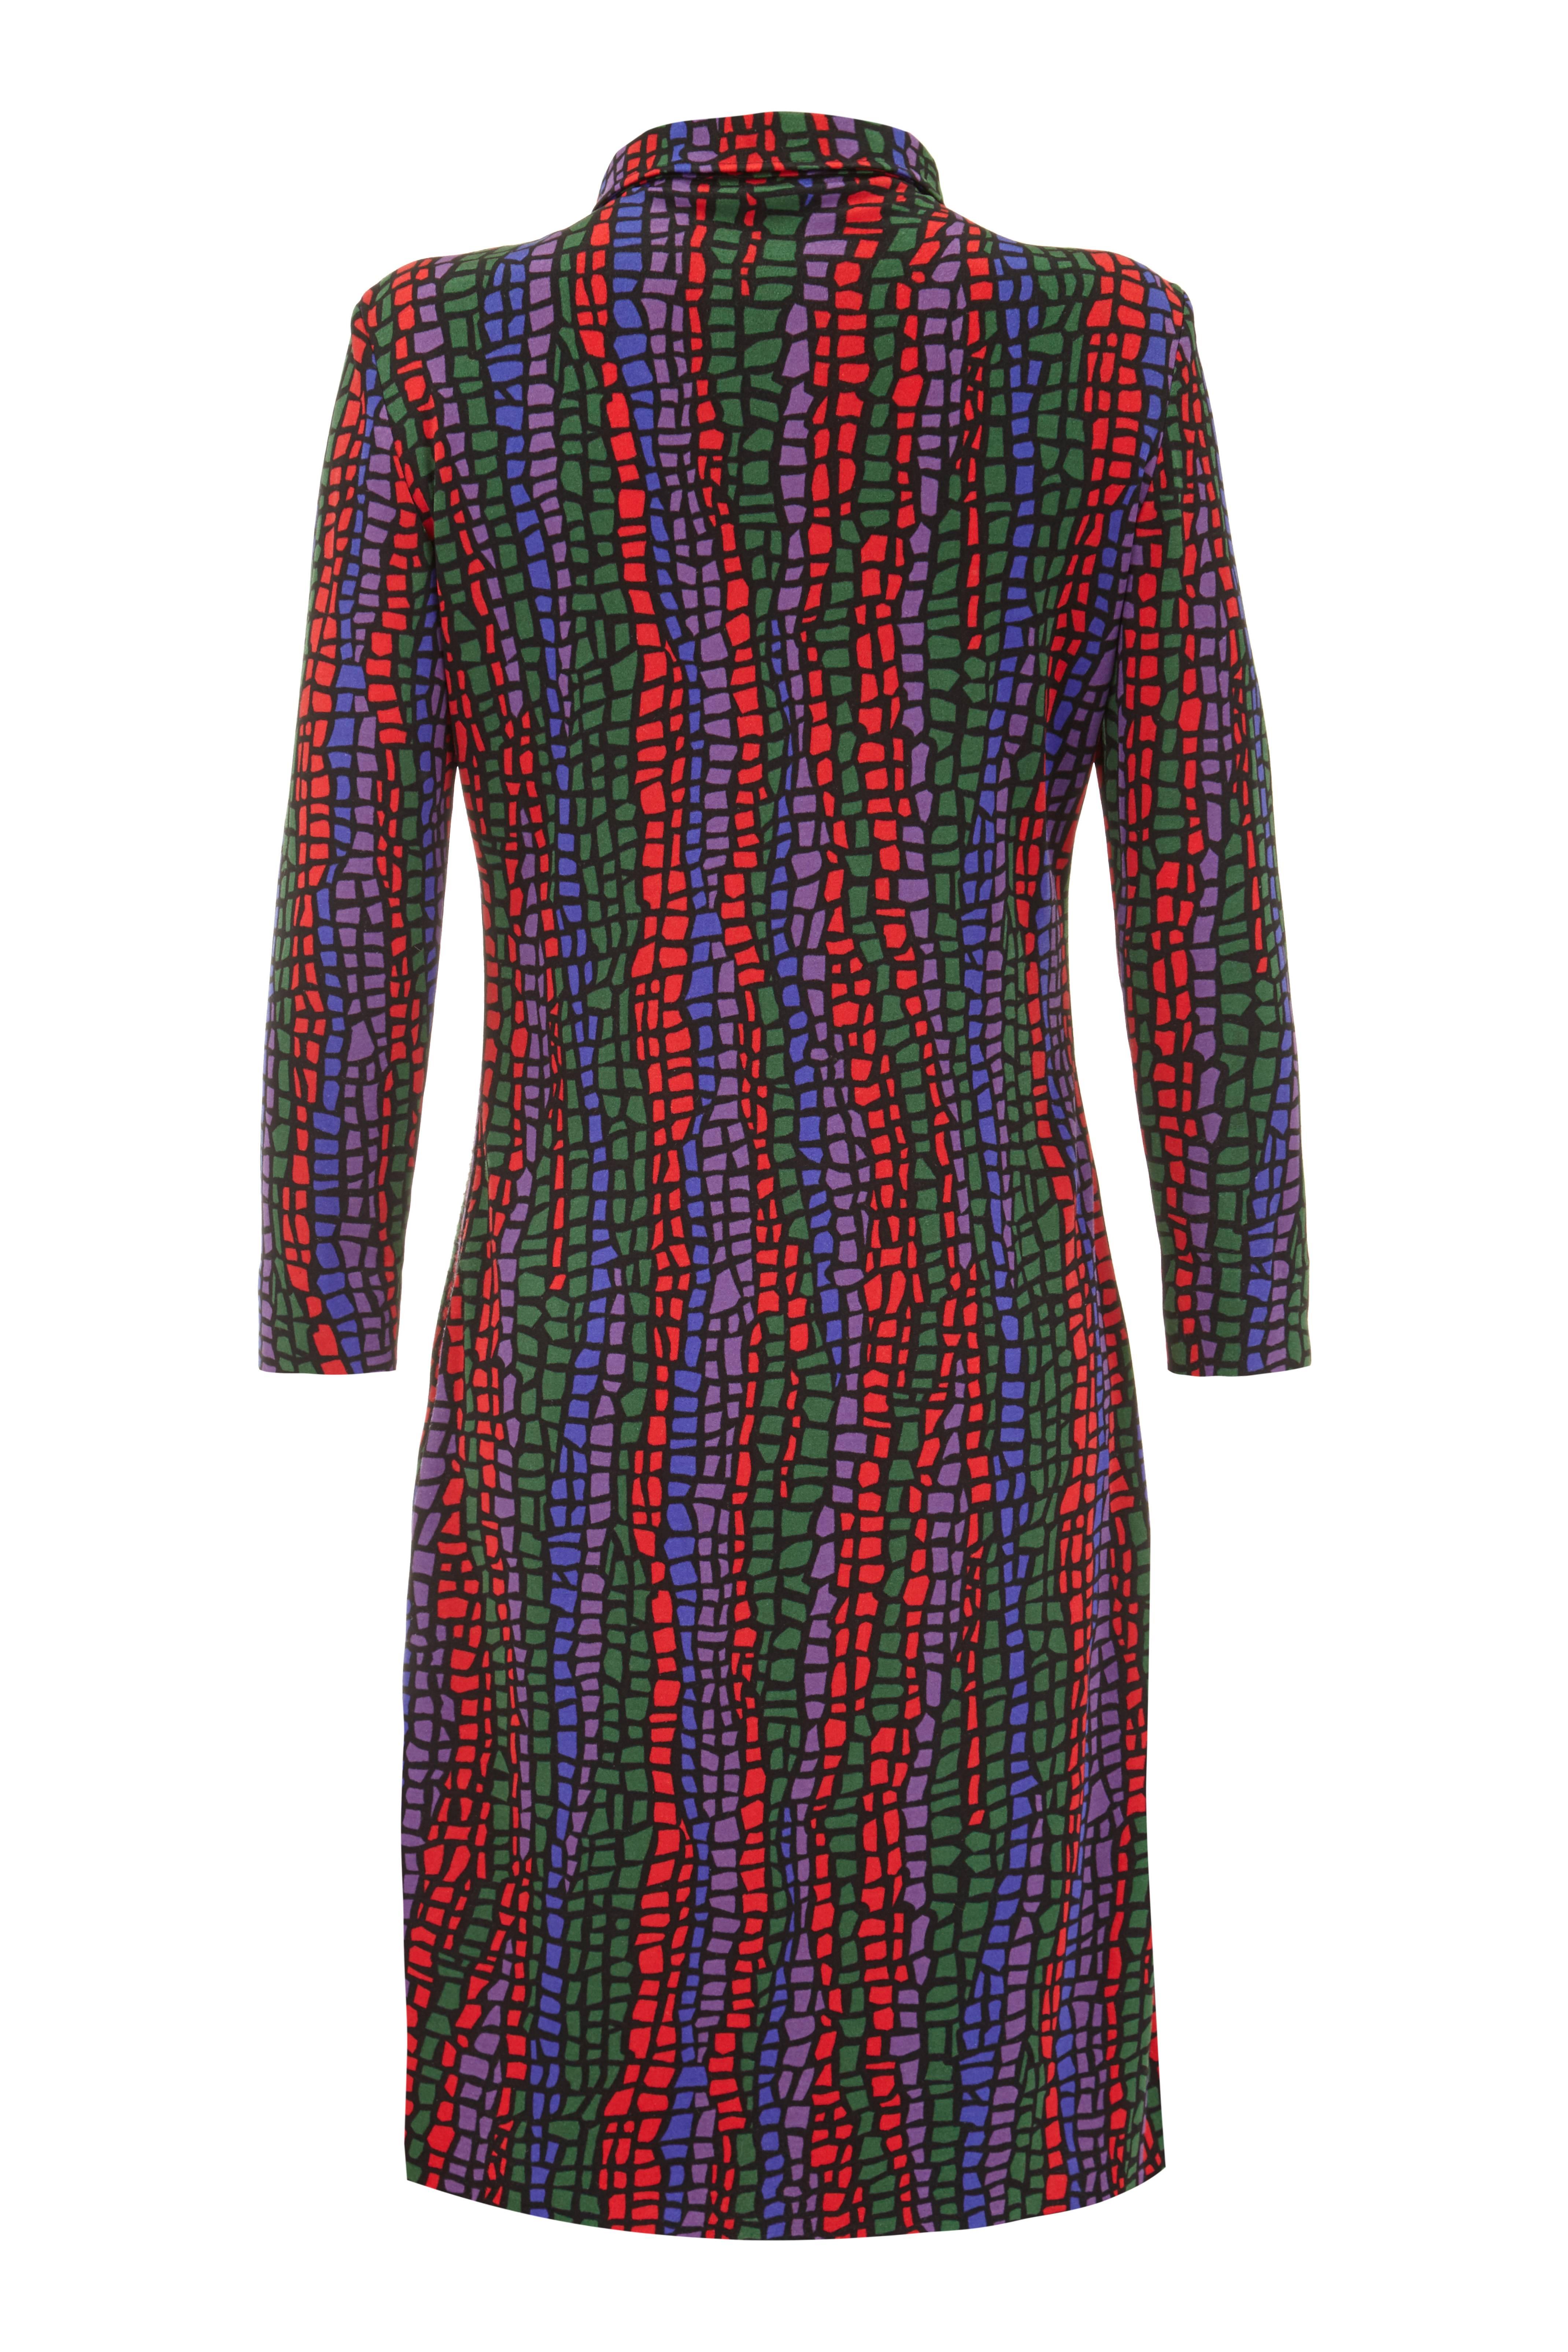 This stylish vintage 1970s silk jersey dress from Nini Capucci and designed in collaboration with Leonard of Paris features a vibrant red, green, purple and blue abstract 'stained glass' effect print. There are lucite button fastenings at the front